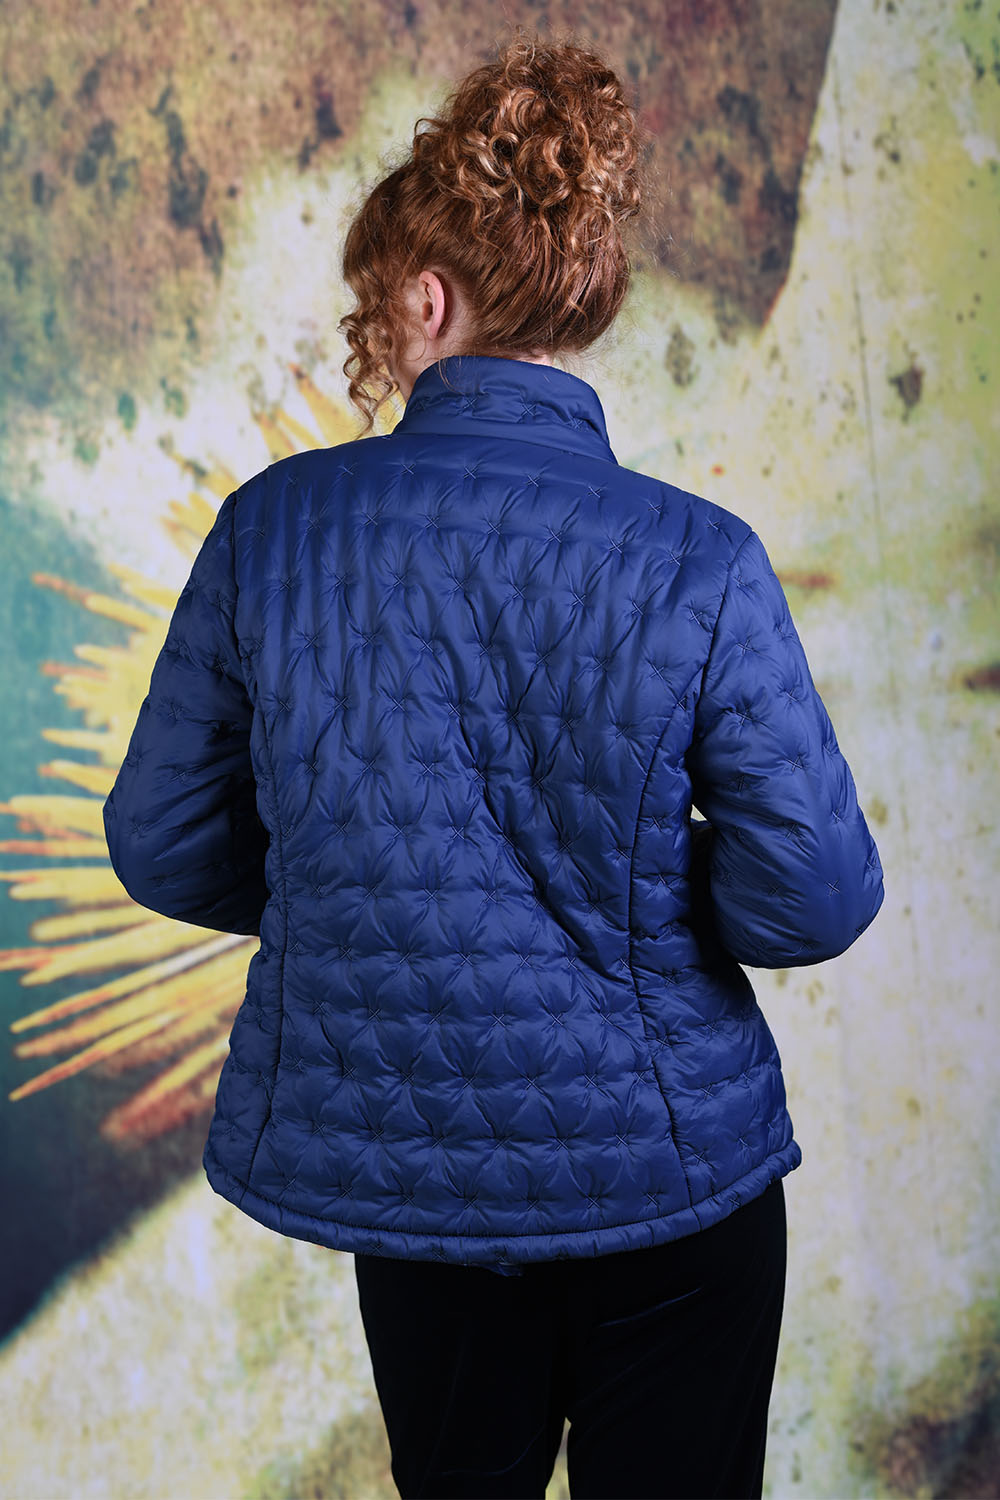 Back of model wearing the Annah Stretton Ambrosia Puffer Jacket in navy